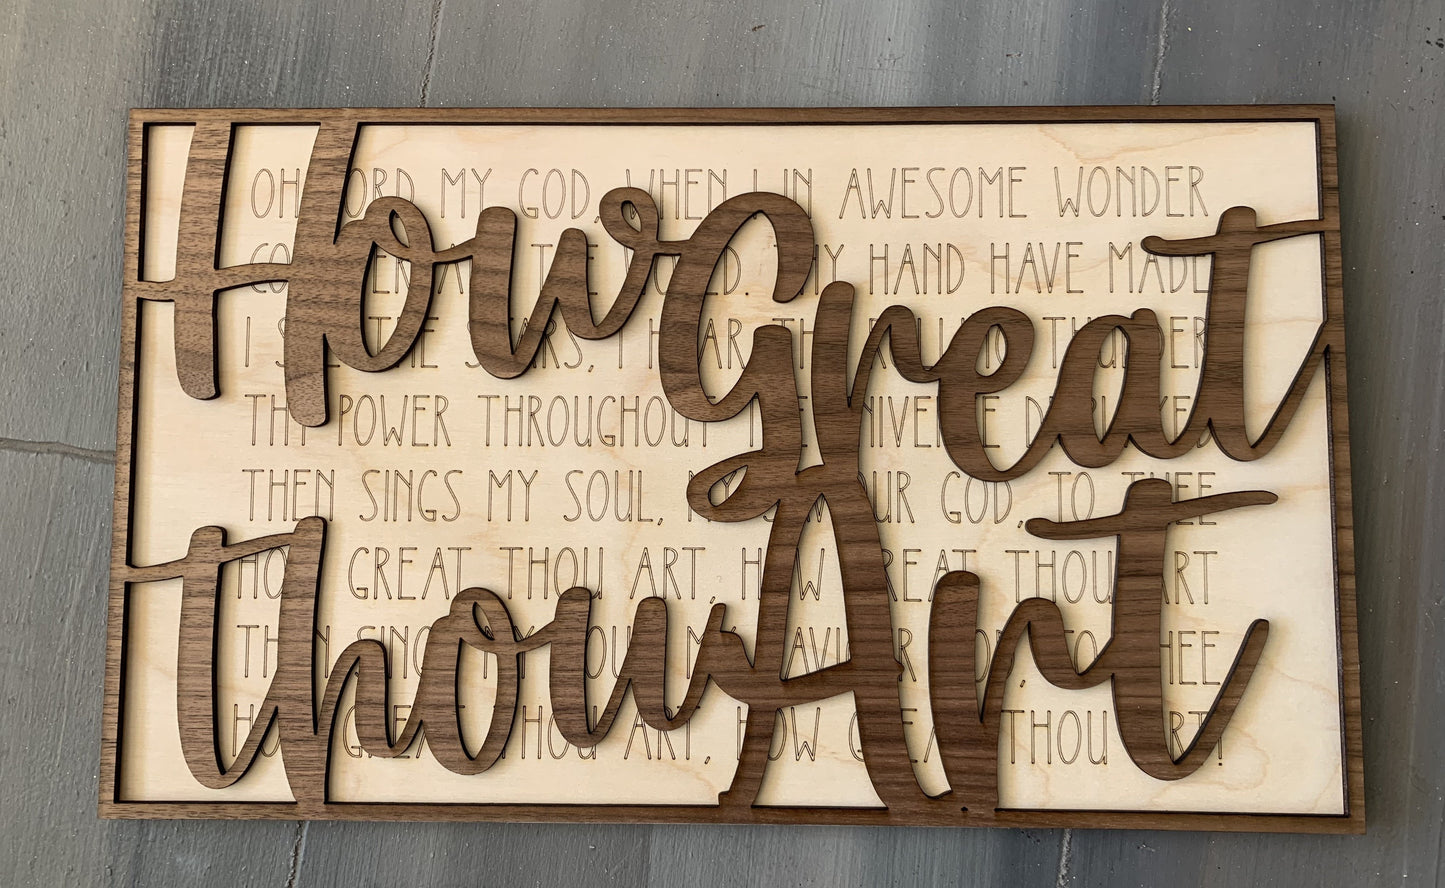 Layered Quotes: How Great Thou Art SVG File Glowforge Ready Laser